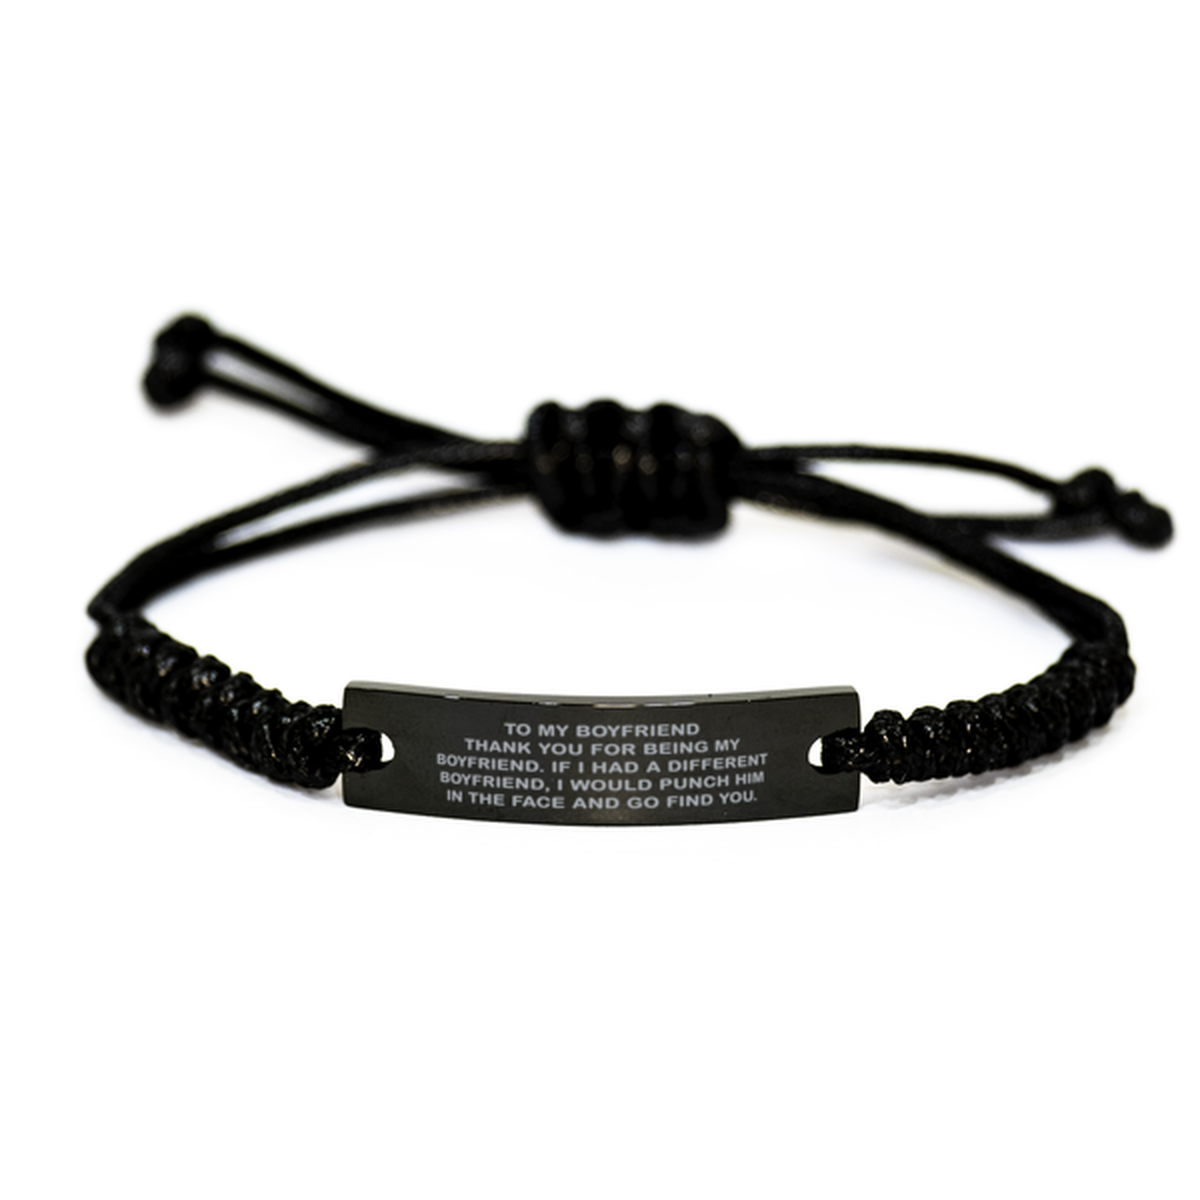 To My Boyfriend Rope Bracelet, Thank You For Being My Boyfriend, Valentines  Gifts For Boyfriend From Girlfriend, Birthday Gifts For Men